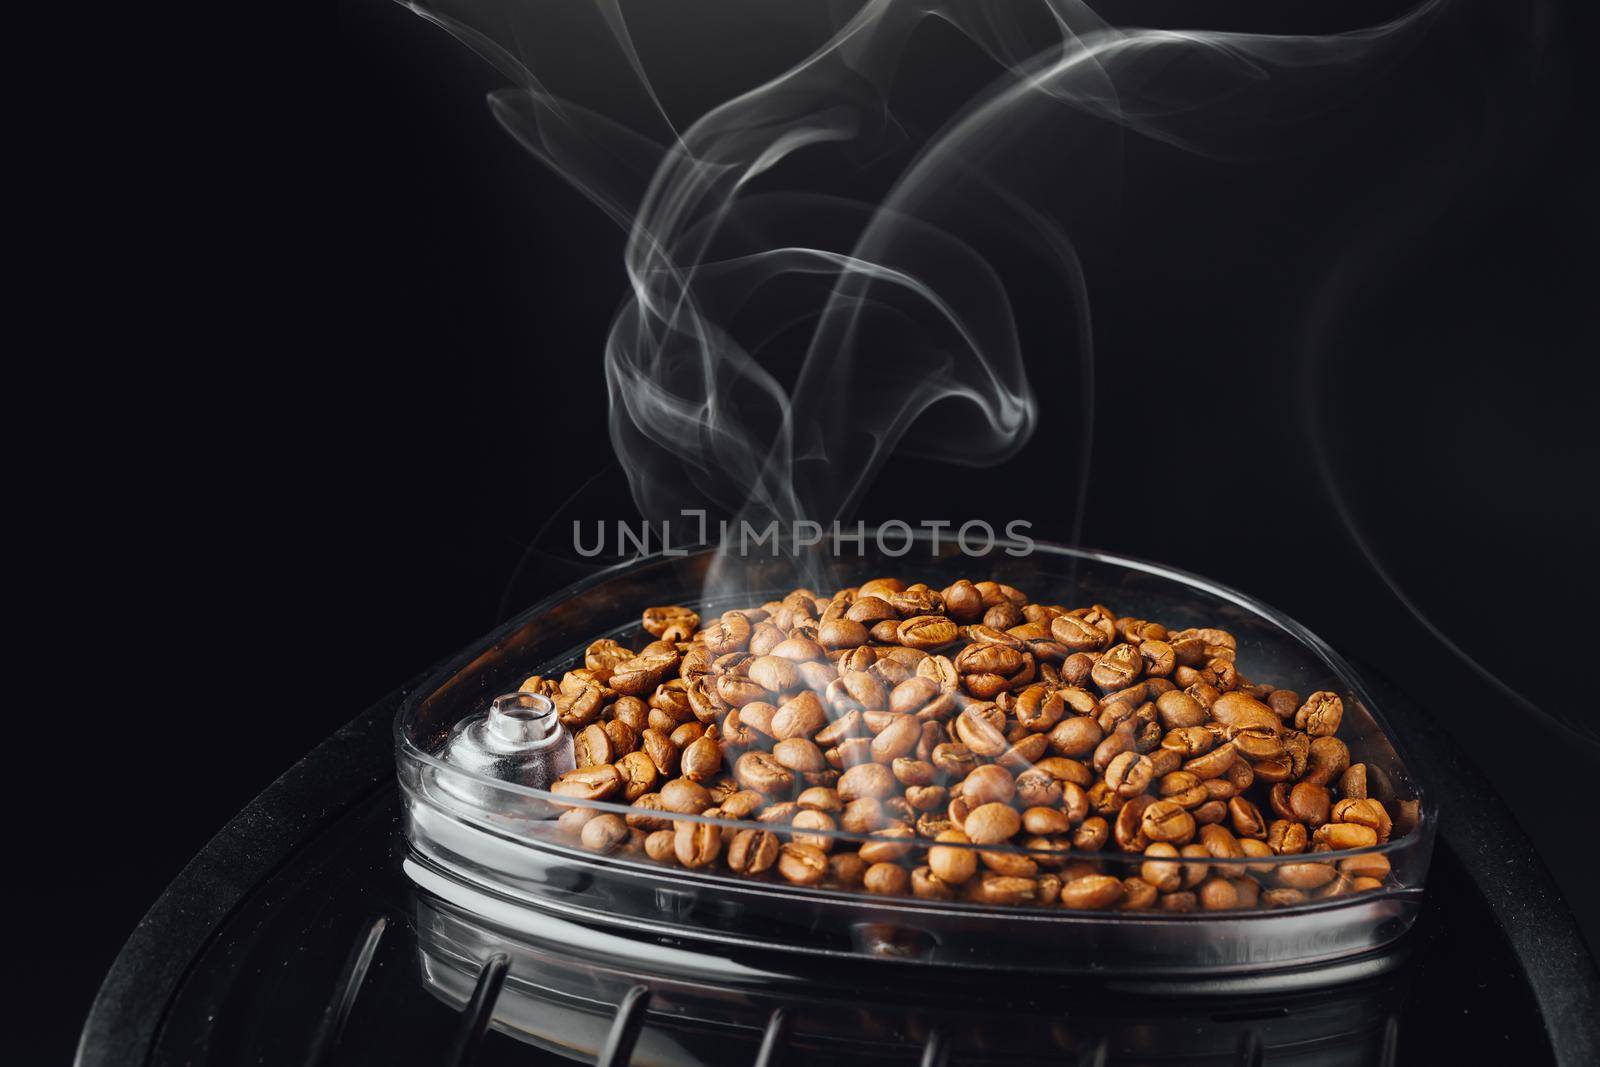 fresh roasted coffee beans with smoke in coffeemaker bean container, close-up view by nikkytok